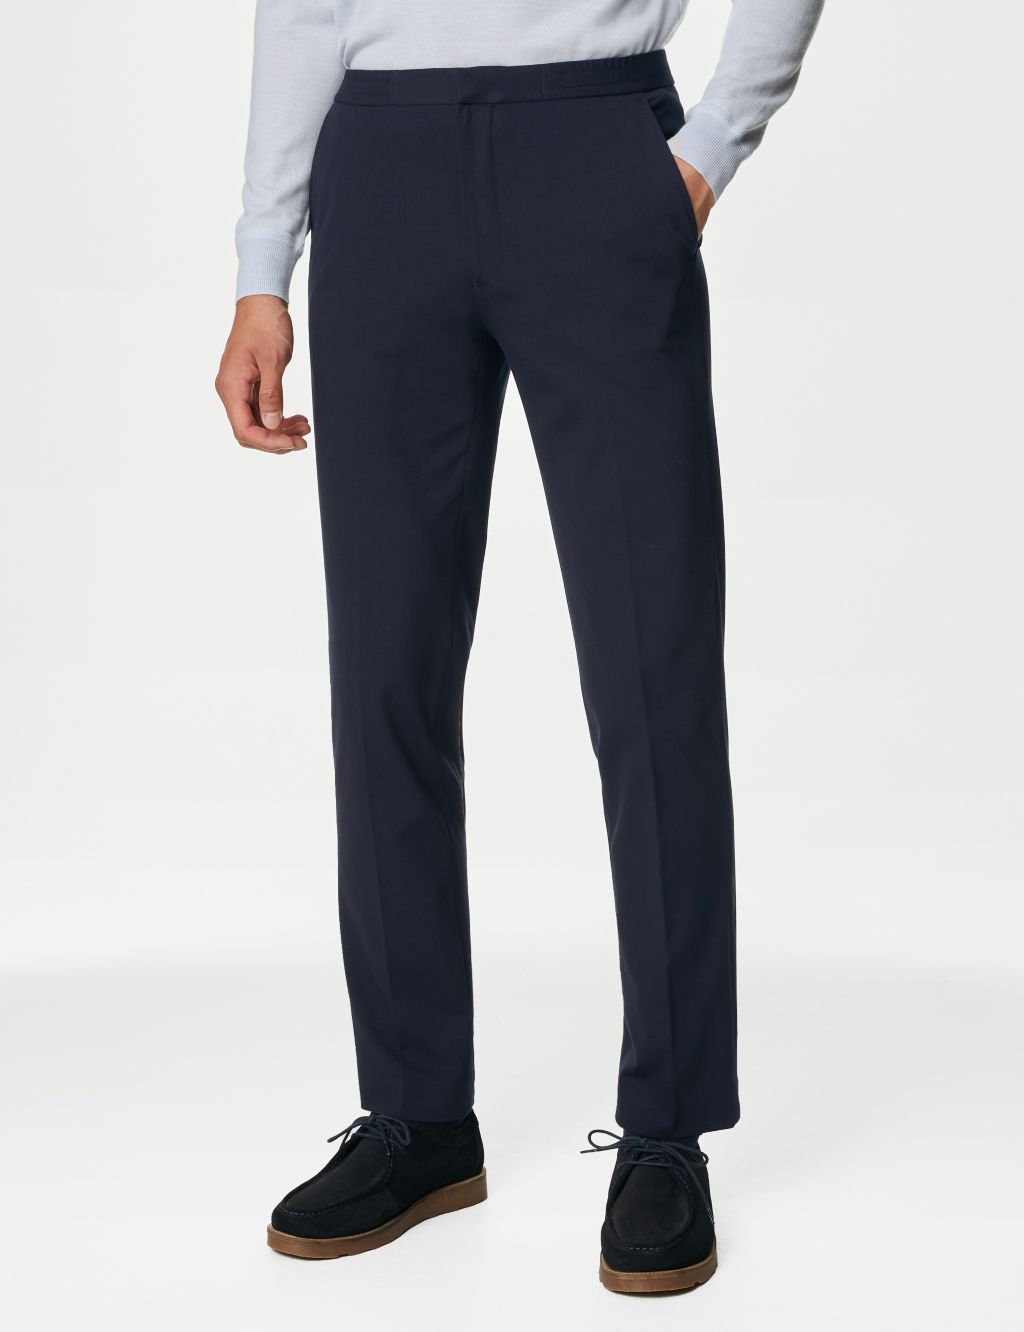 Jersey Flat Front Stretch Trousers image 3